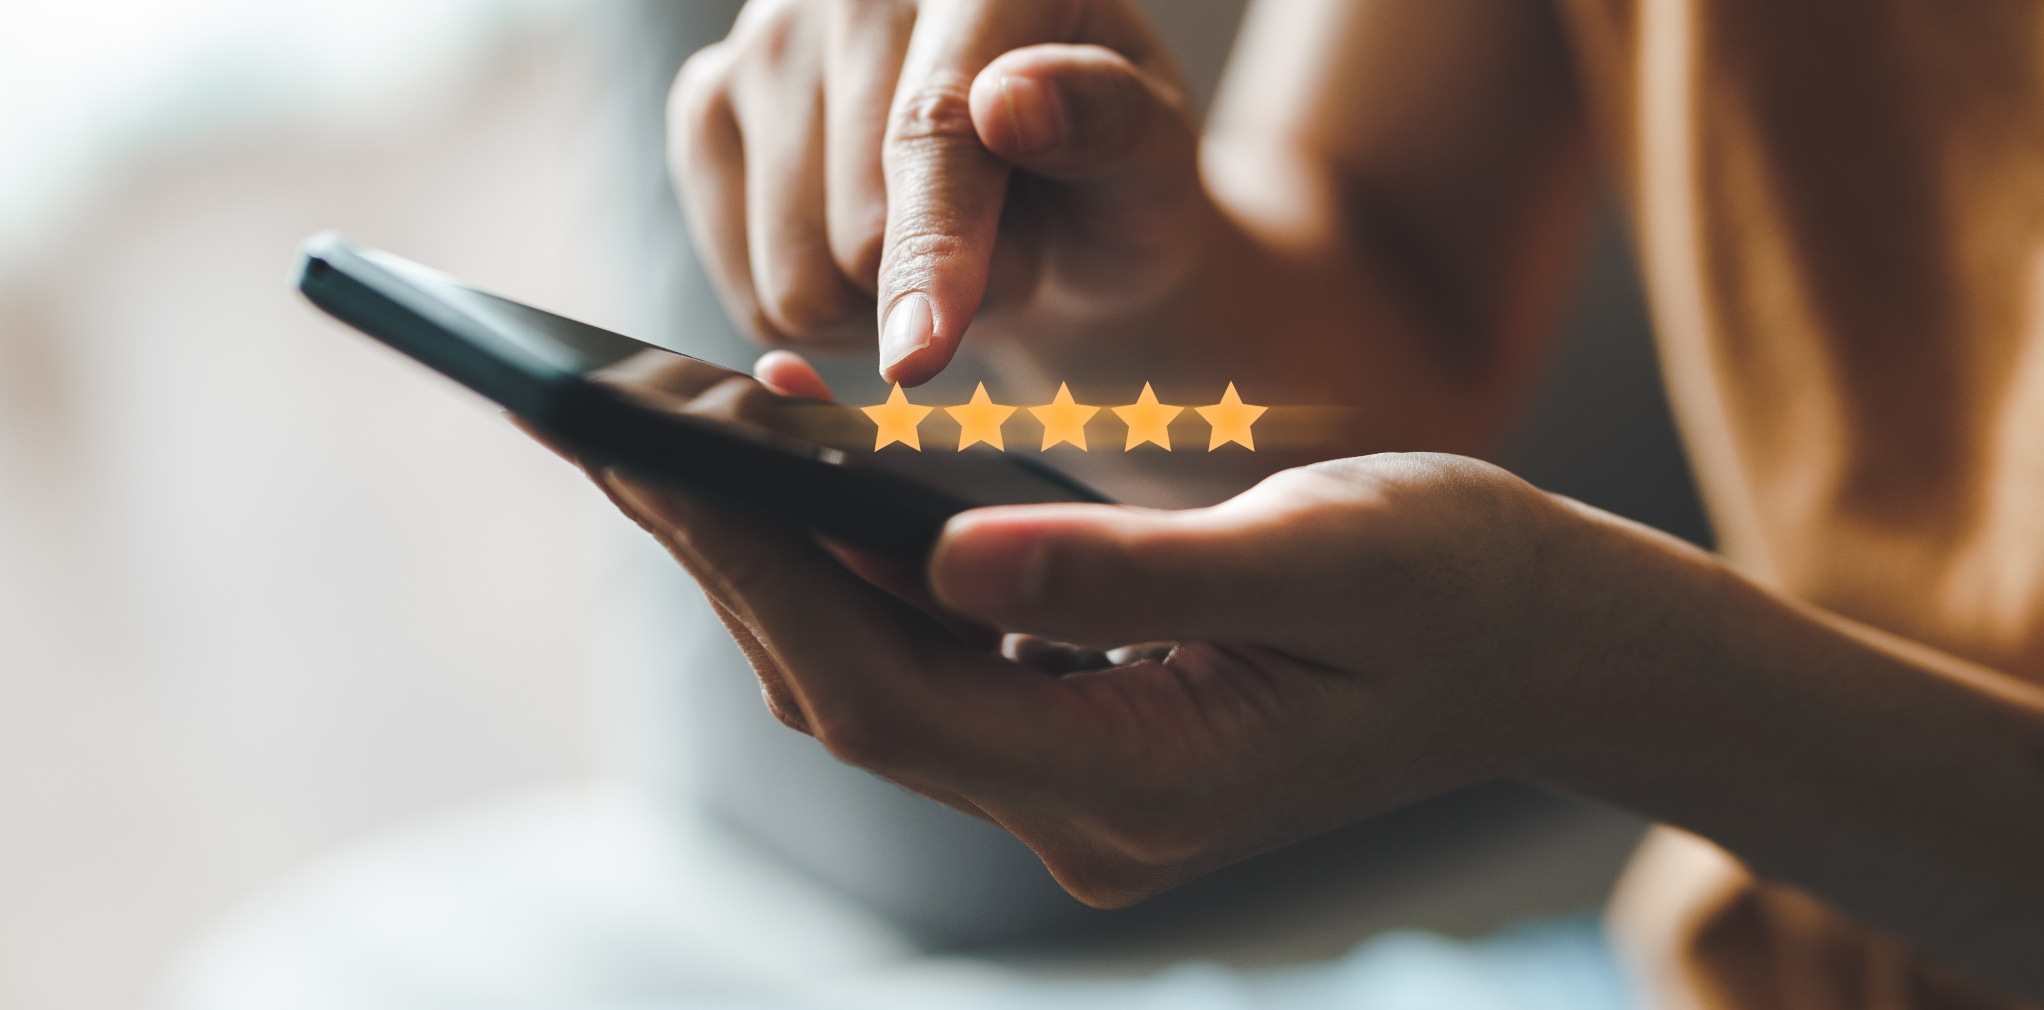 3 Tips to Boost Insurance Carrier Reviews Online